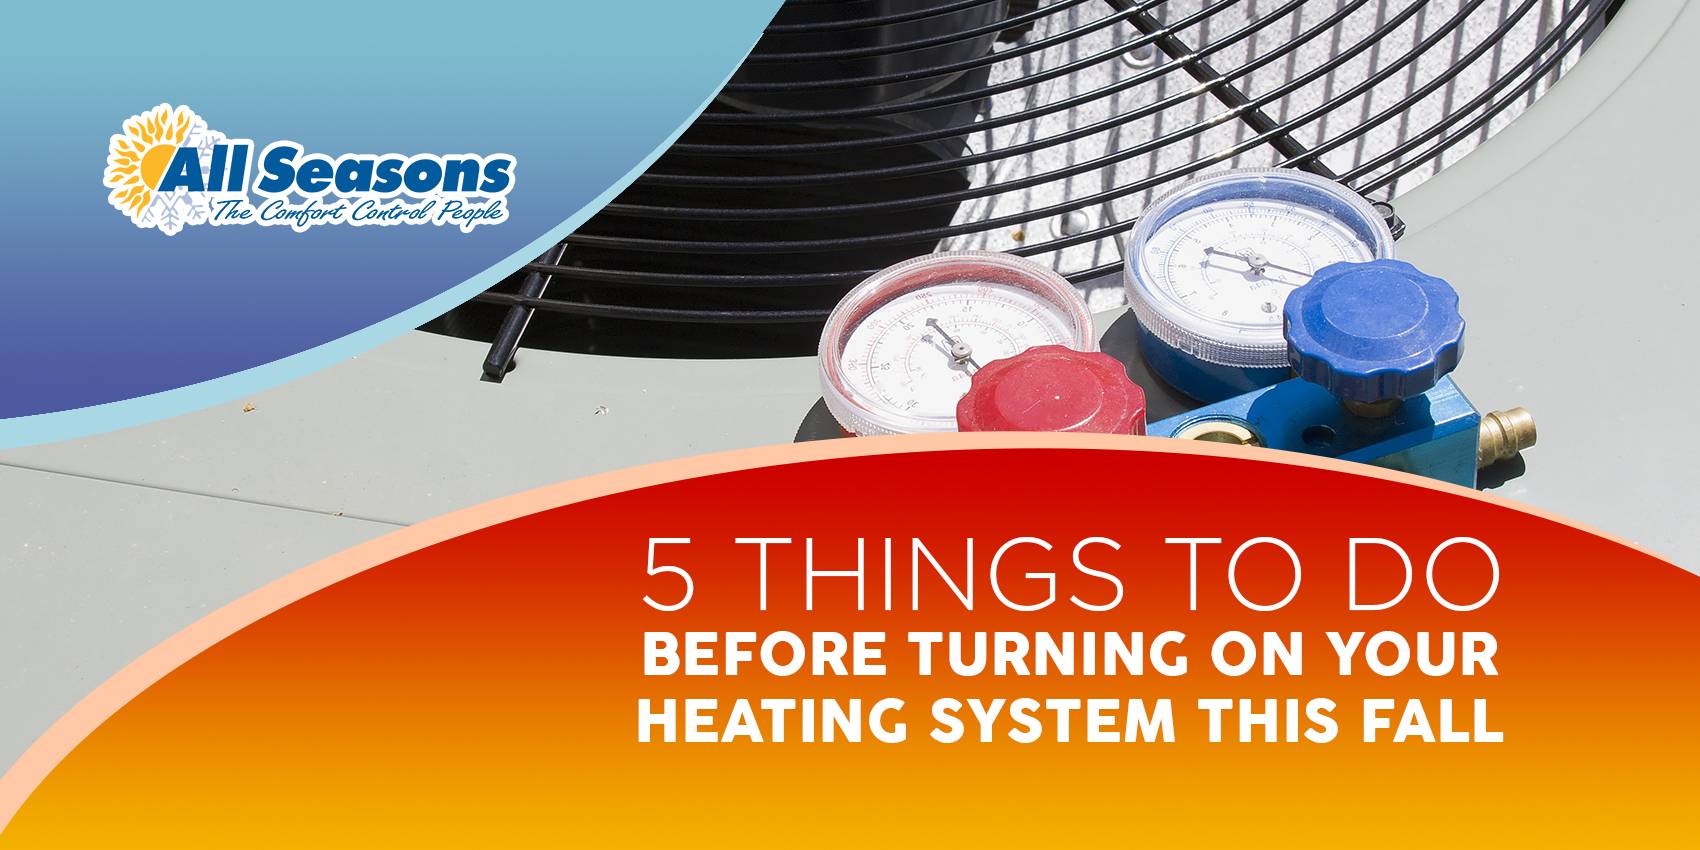 5 Things to Do Before Turning On Your Heating System This Fall